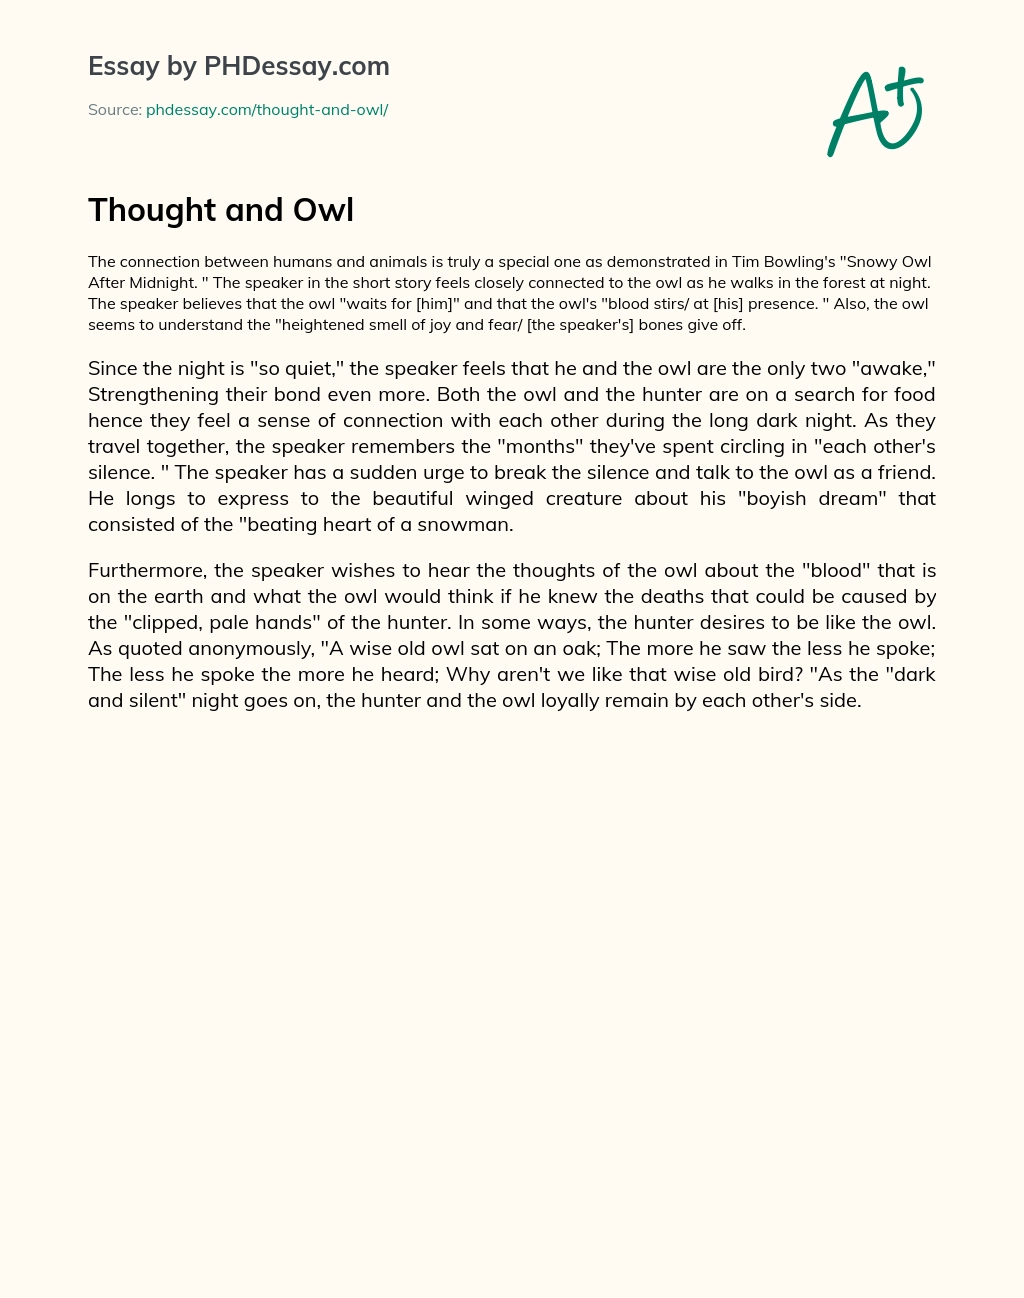 Thought and Owl essay